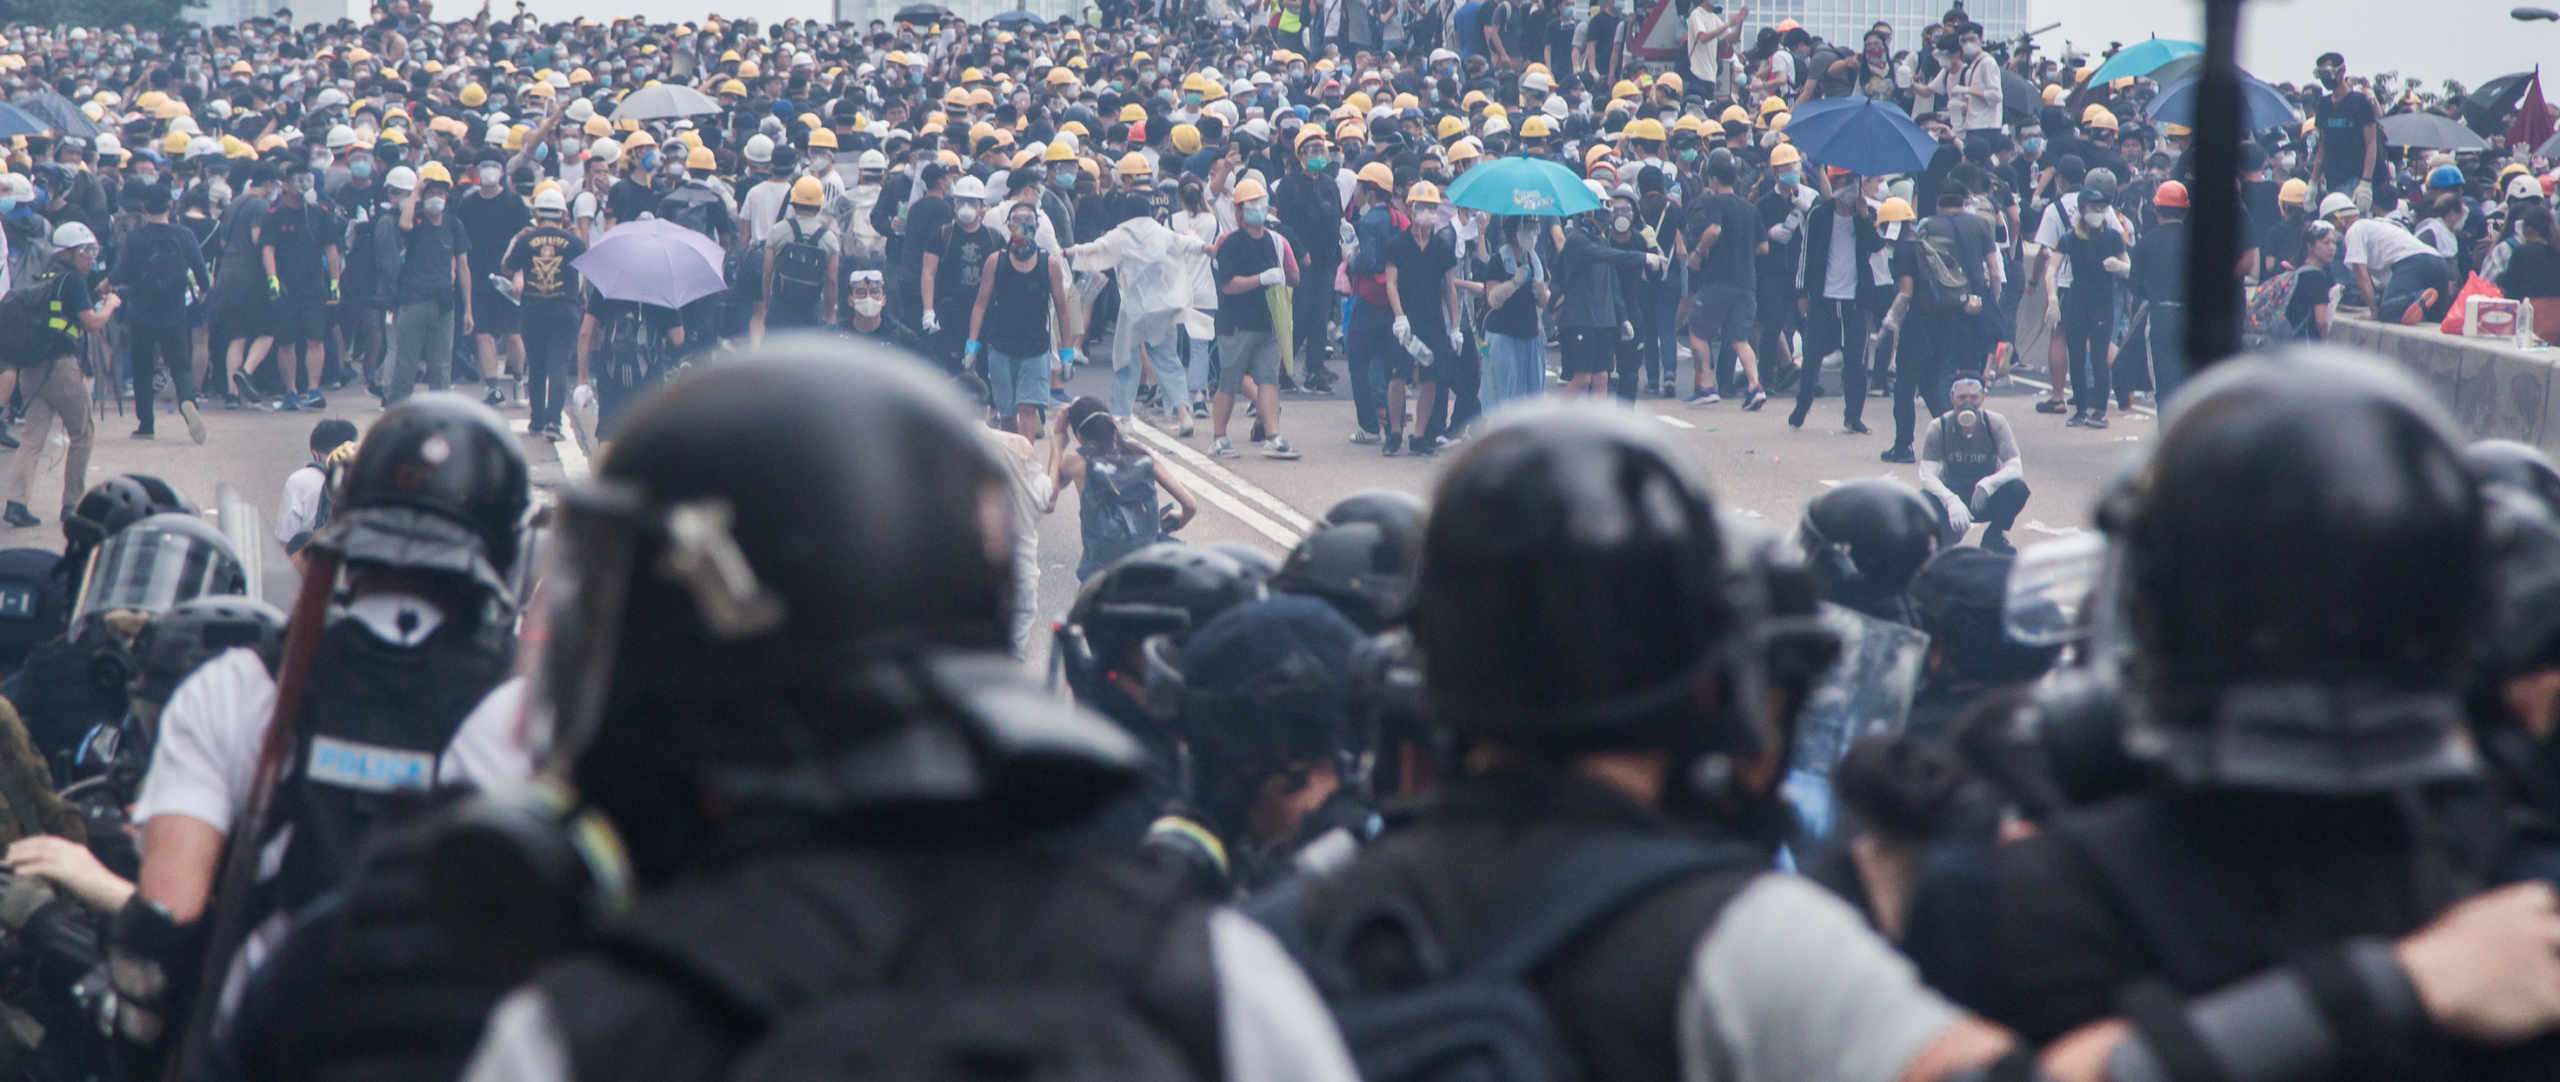 Sexual violence against Hong Kong protesters â€“ what's going on? - Amnesty  International